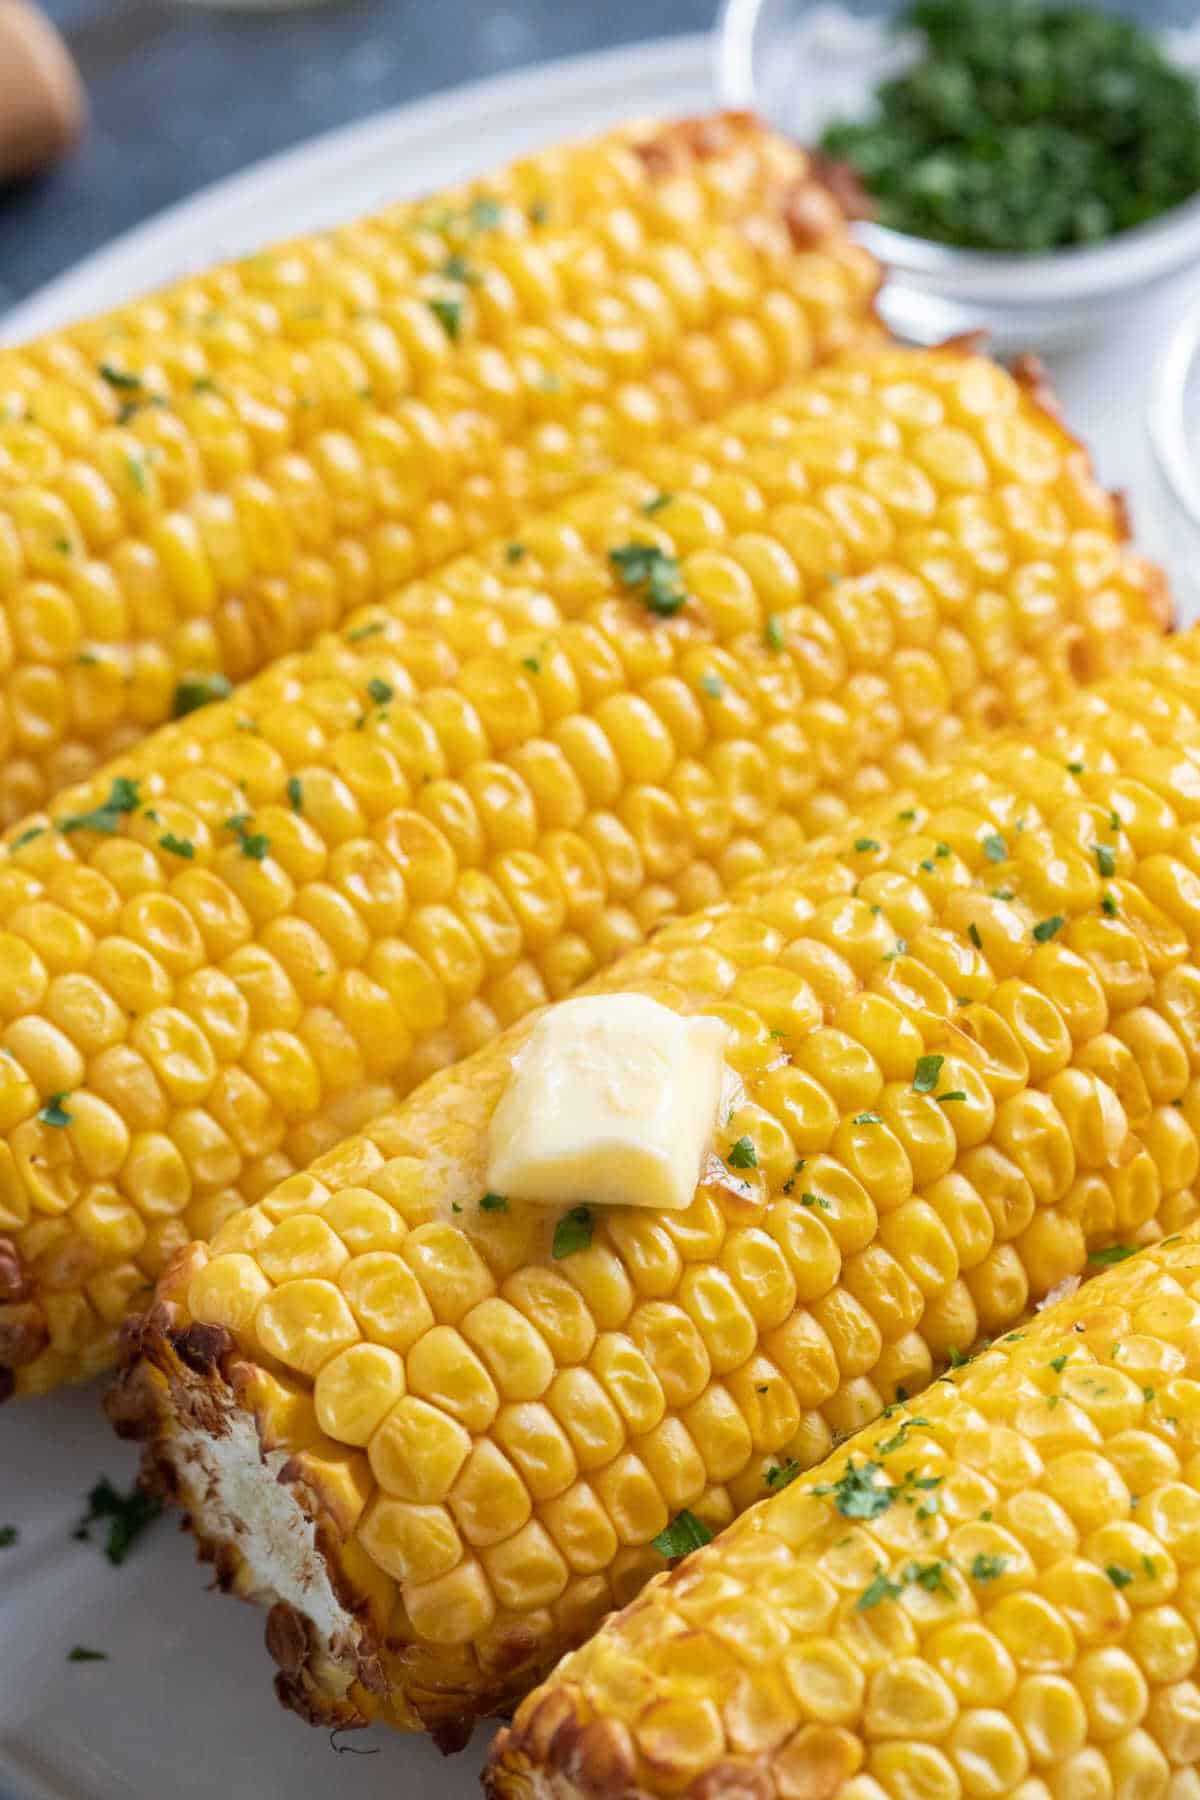 Corn on the cob on a white plate brushed with melted butter.